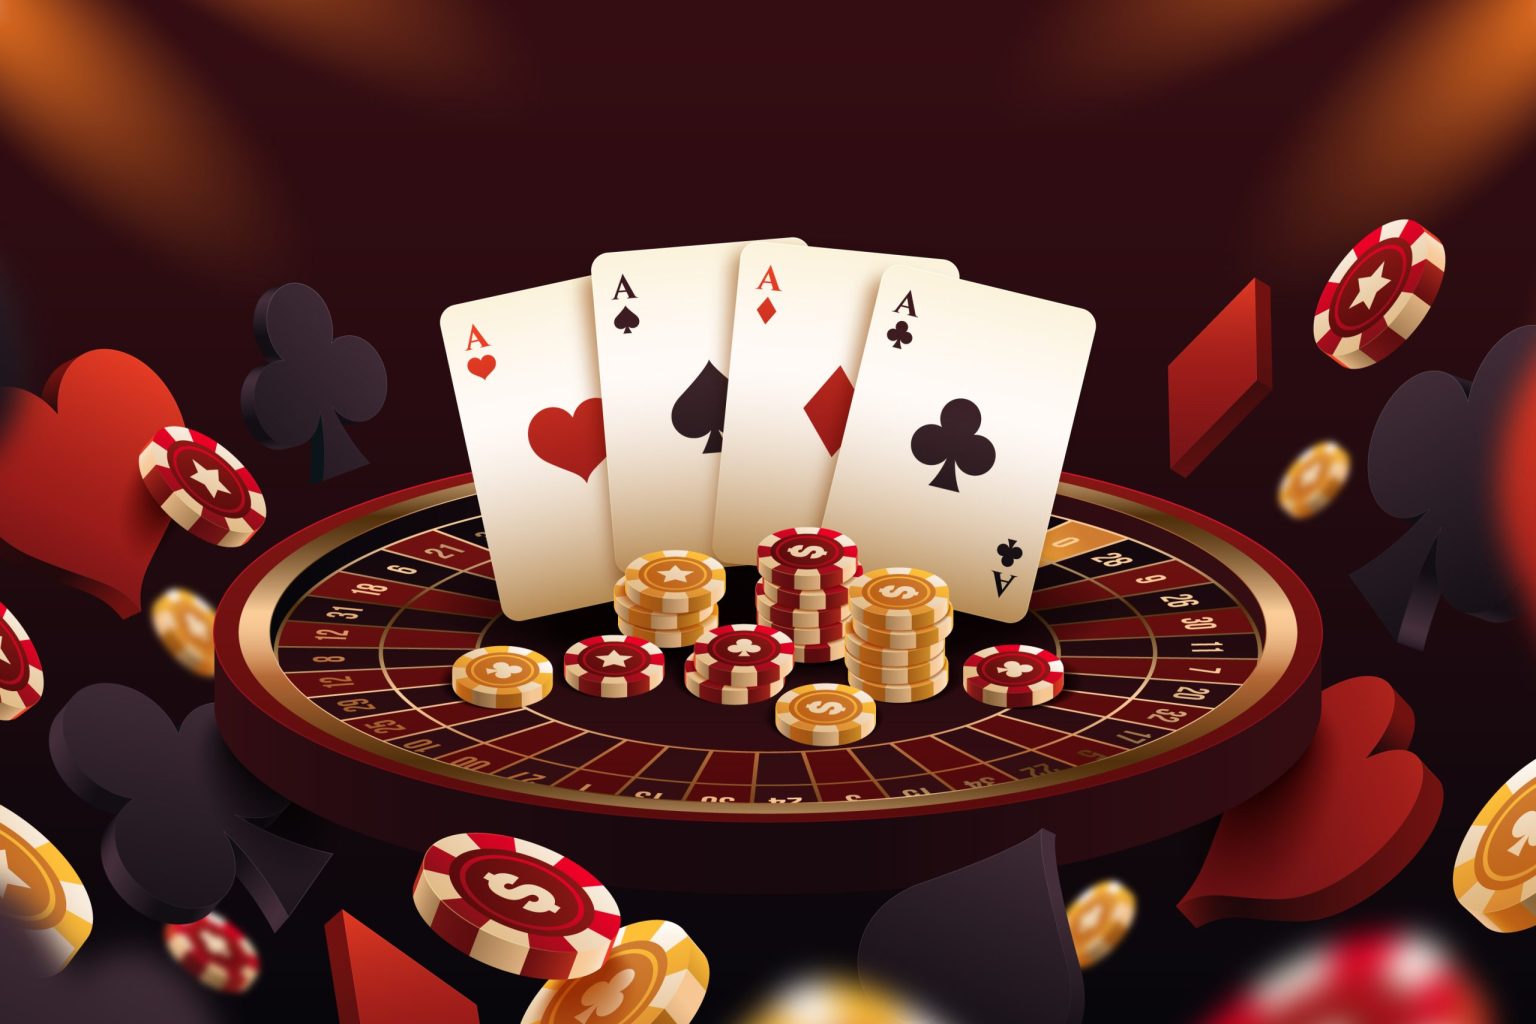 Dive into the case study of a Rummy game’s development journey, highlighting the fusion of traditional card game charm with modern technology to create an engaging and competitive multiplayer experience for players worldwide.